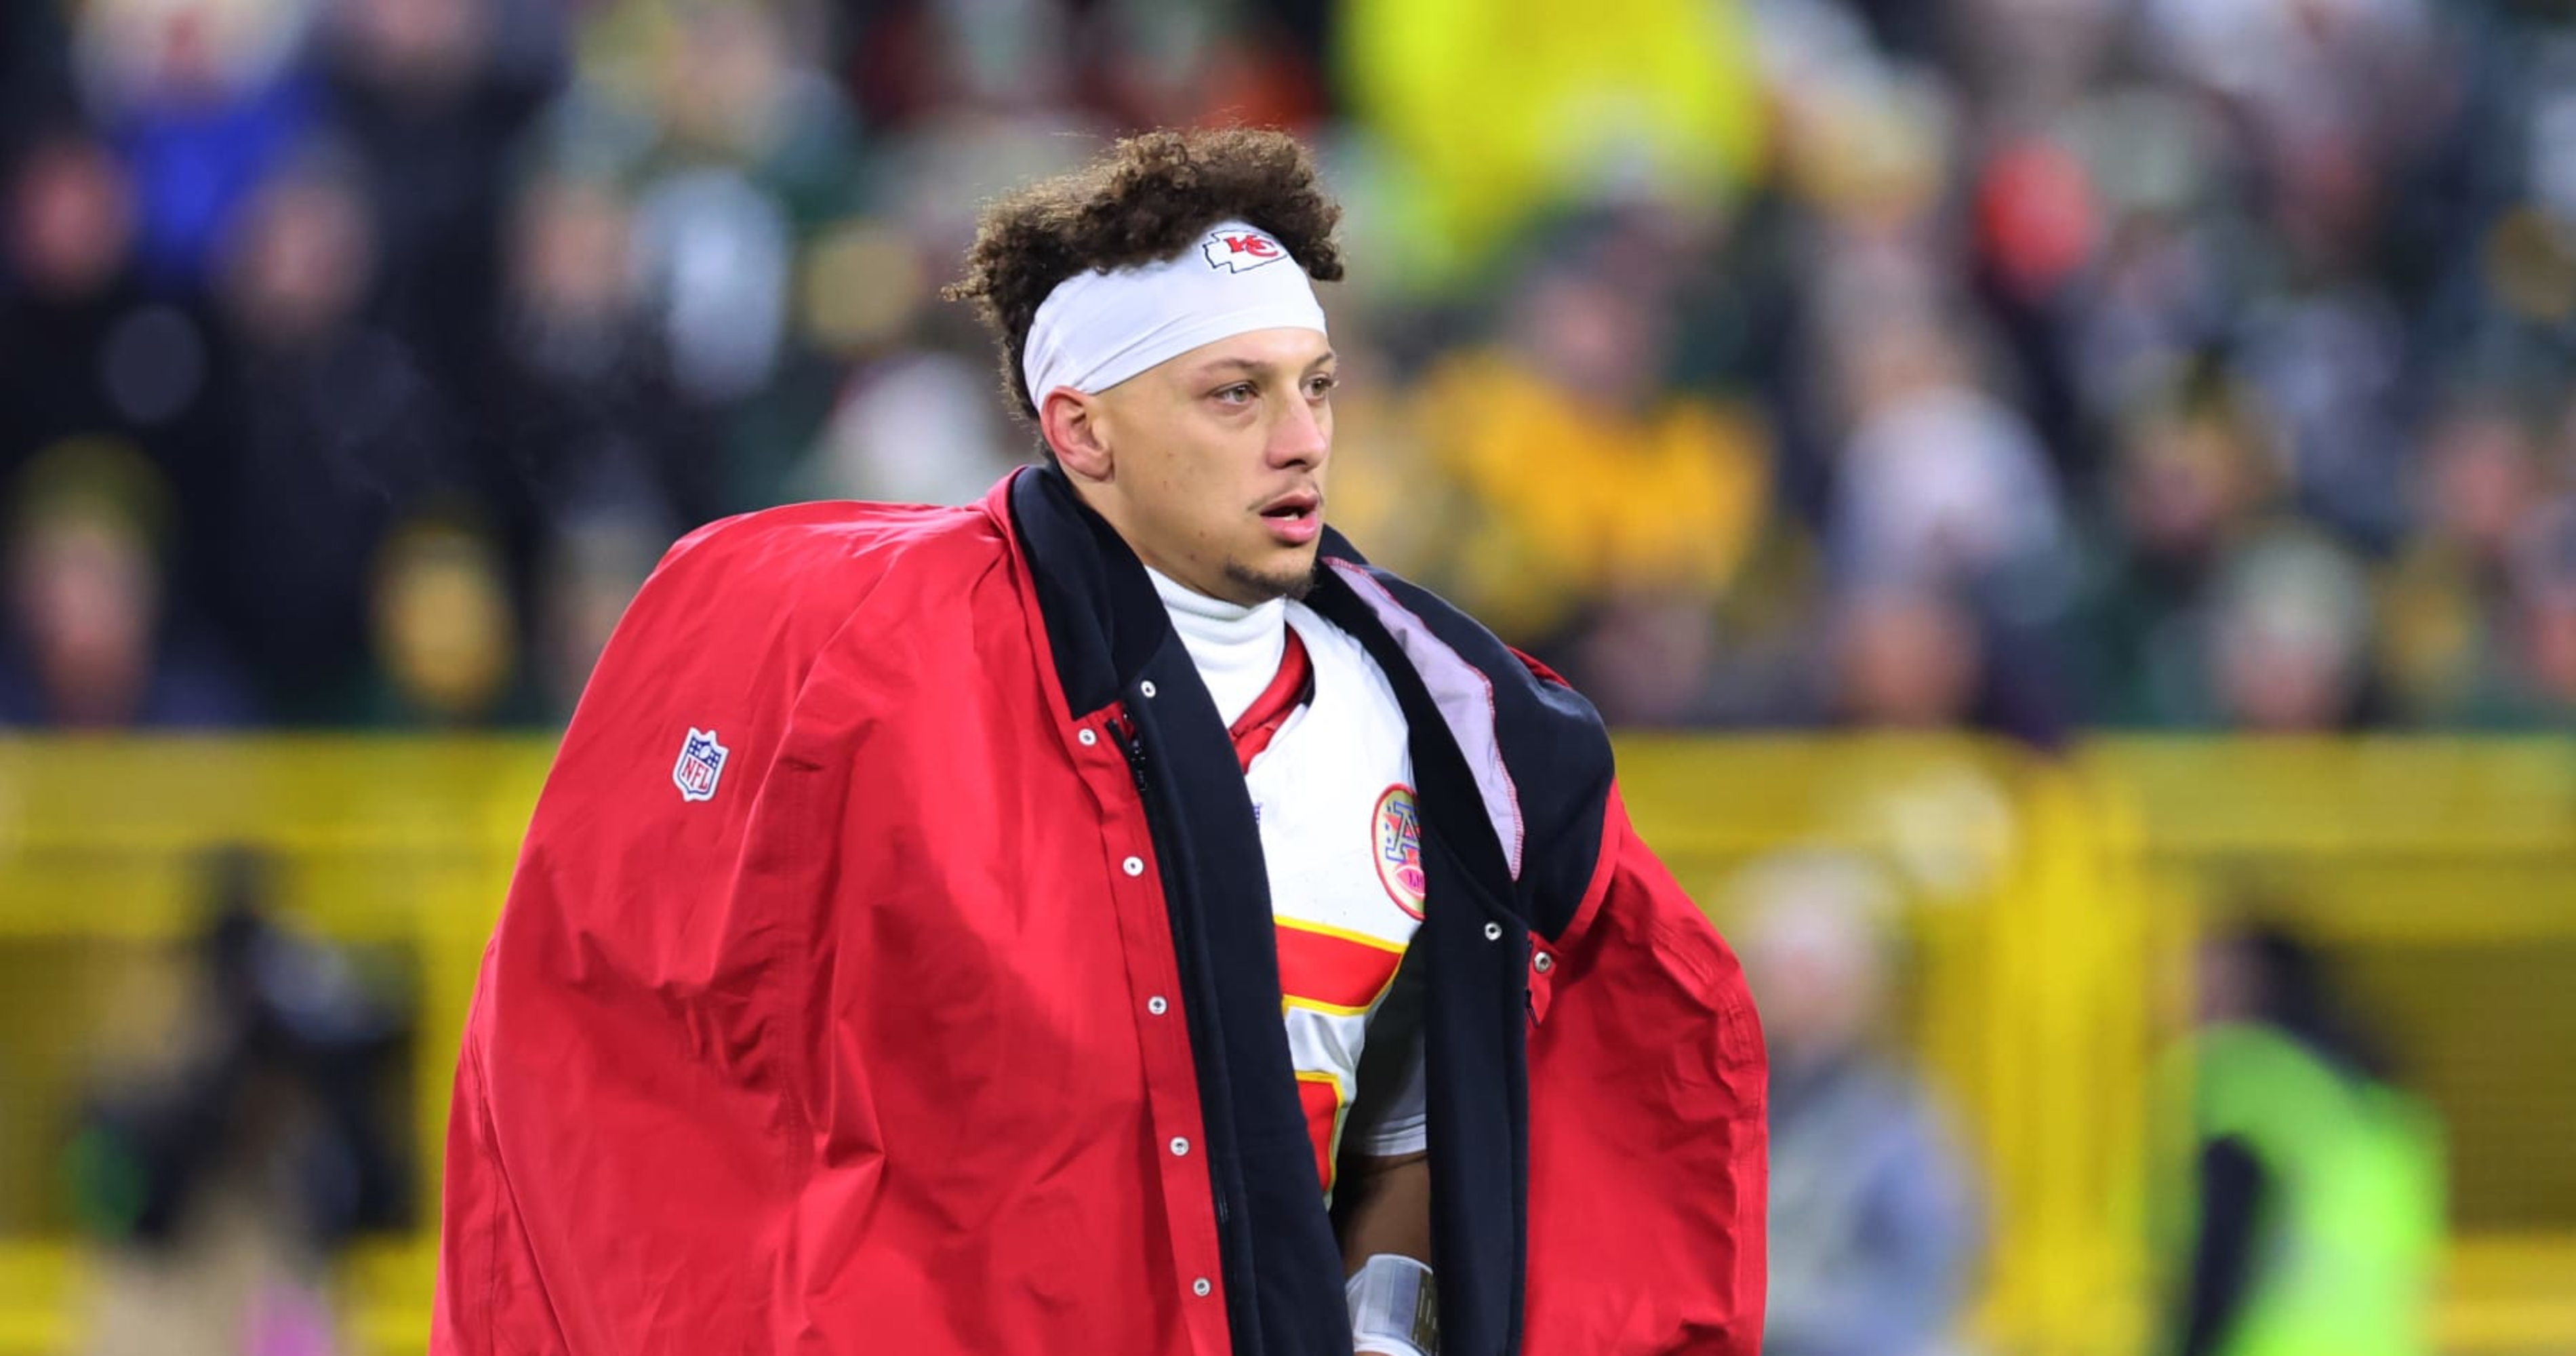 Chiefs vs Packers ends with chaotic final drive ridden with miscues